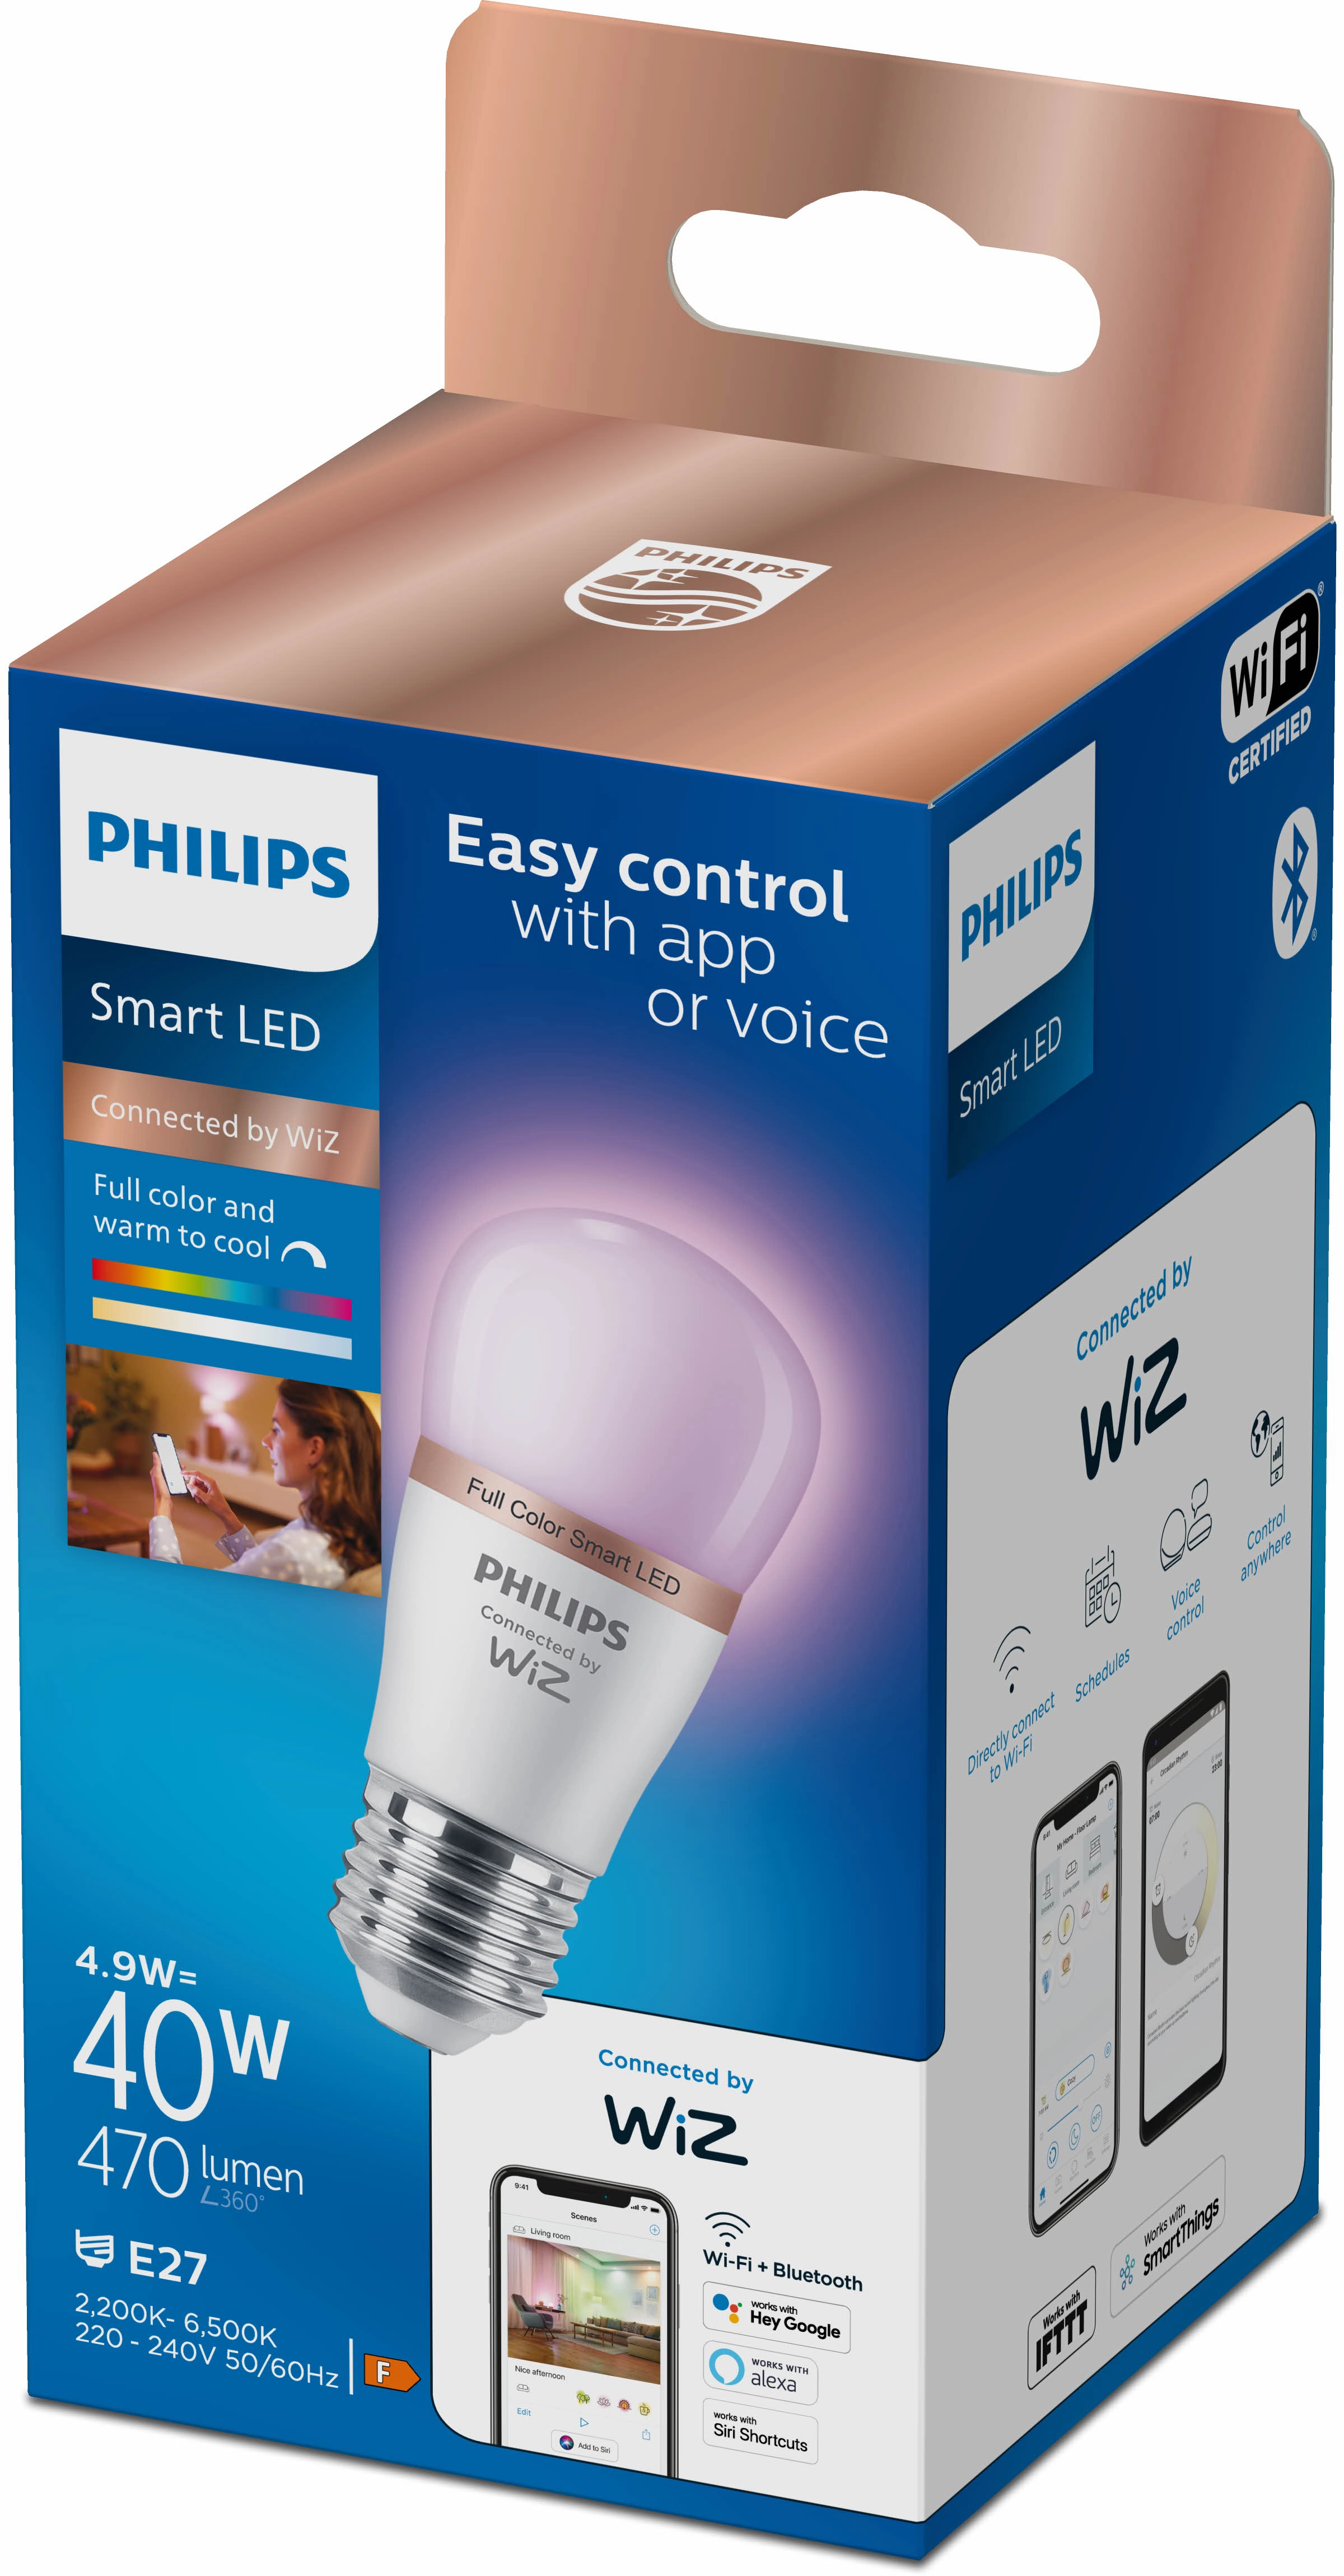 Philips LED smart goccia LED Tunable White and Color dimmer. E27 / 40 W /  470 lm